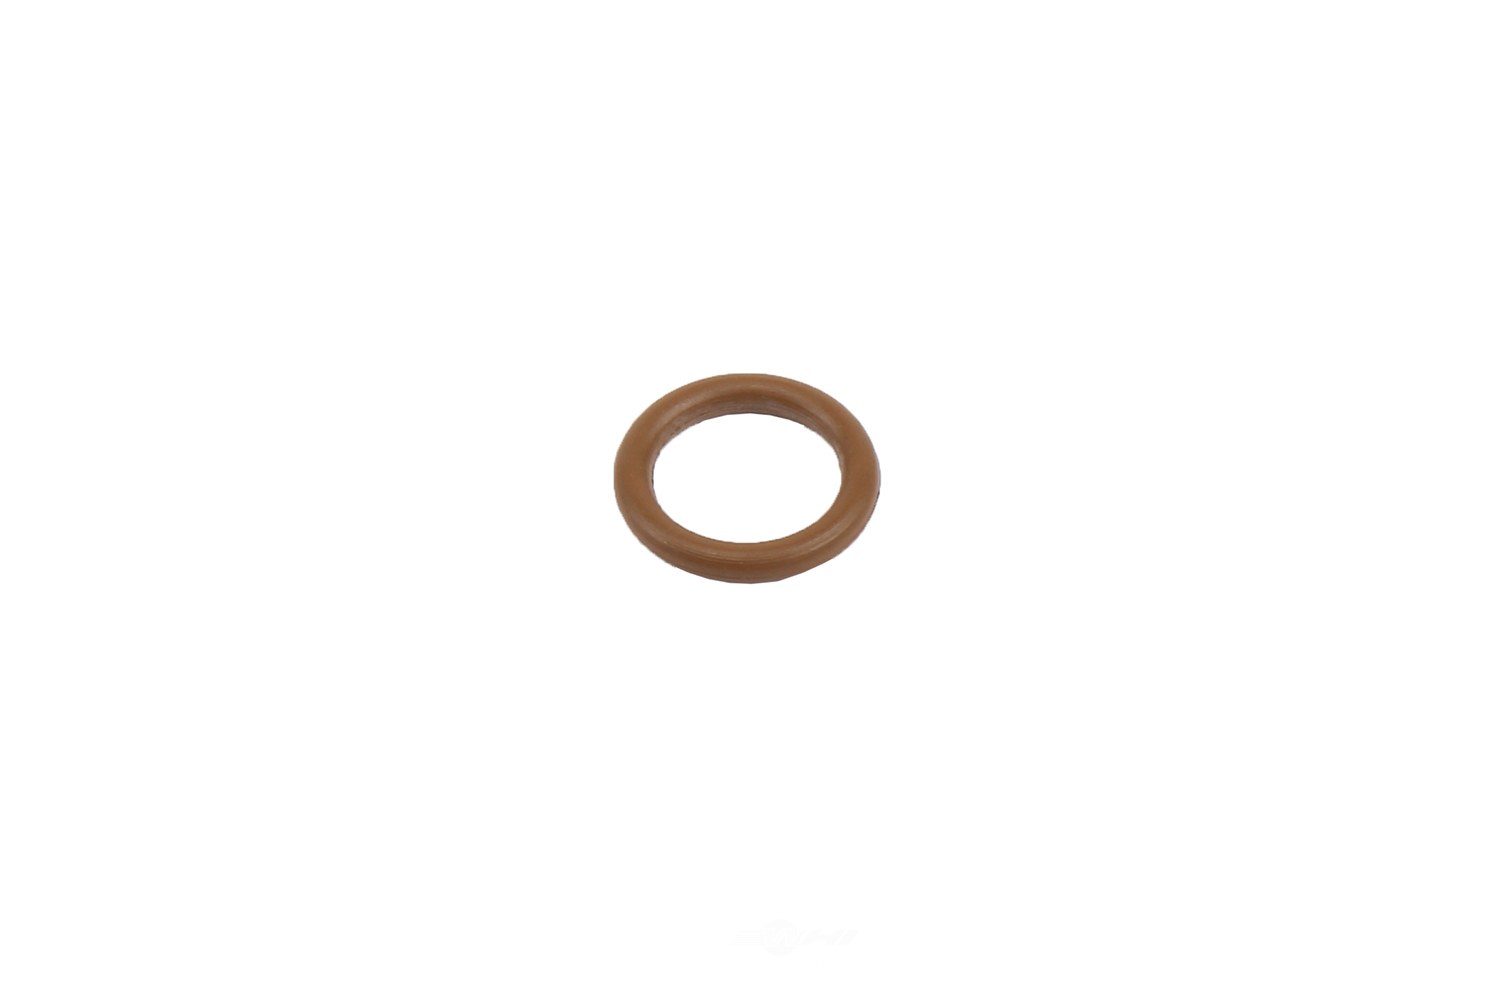 GM GENUINE PARTS - Fuel Line Seal Ring - GMP 19258137